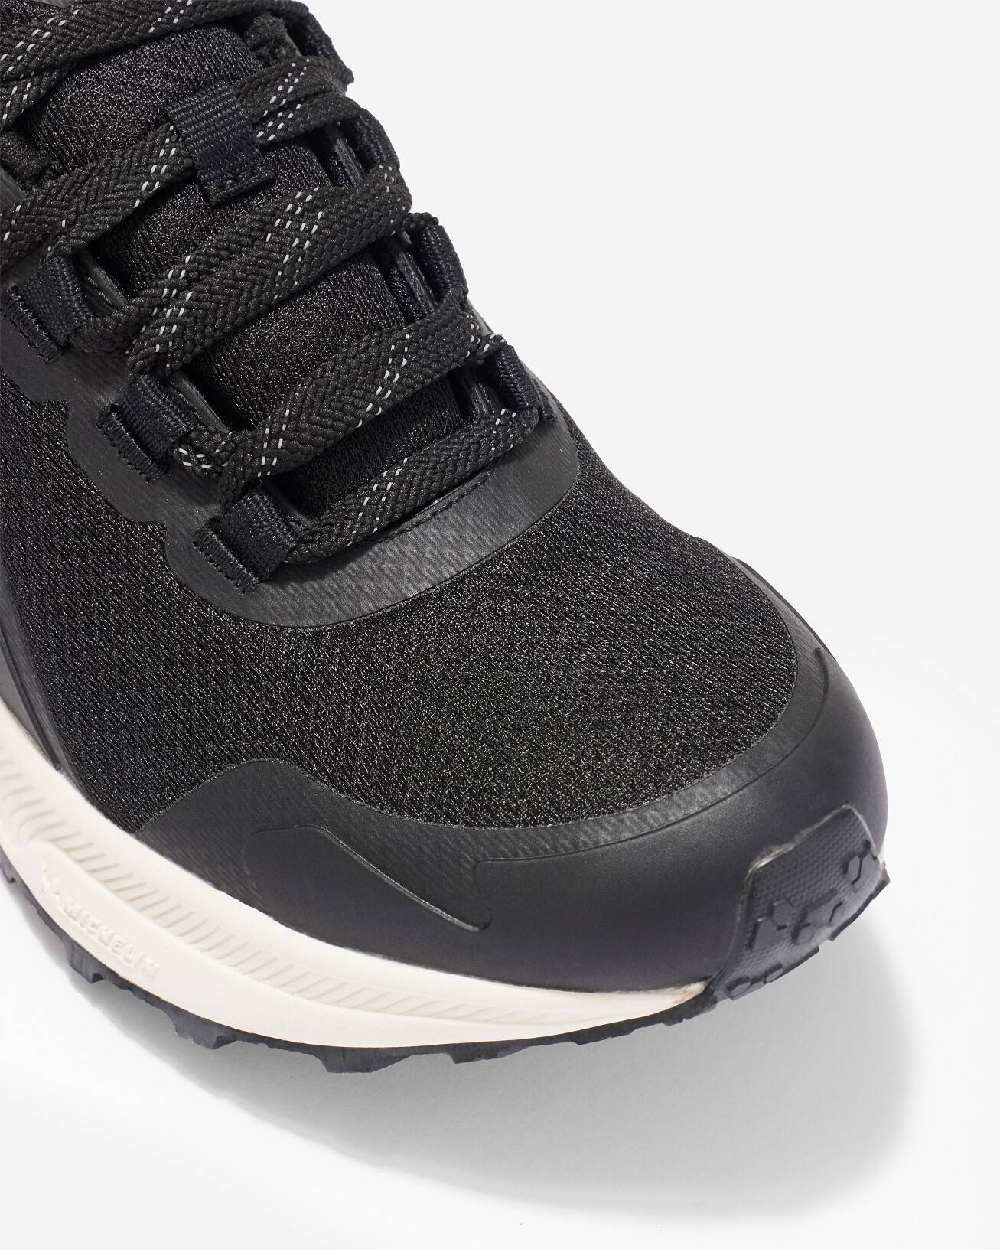 Black coloured LeMieux Trax Waterproof Trainers on grey background 